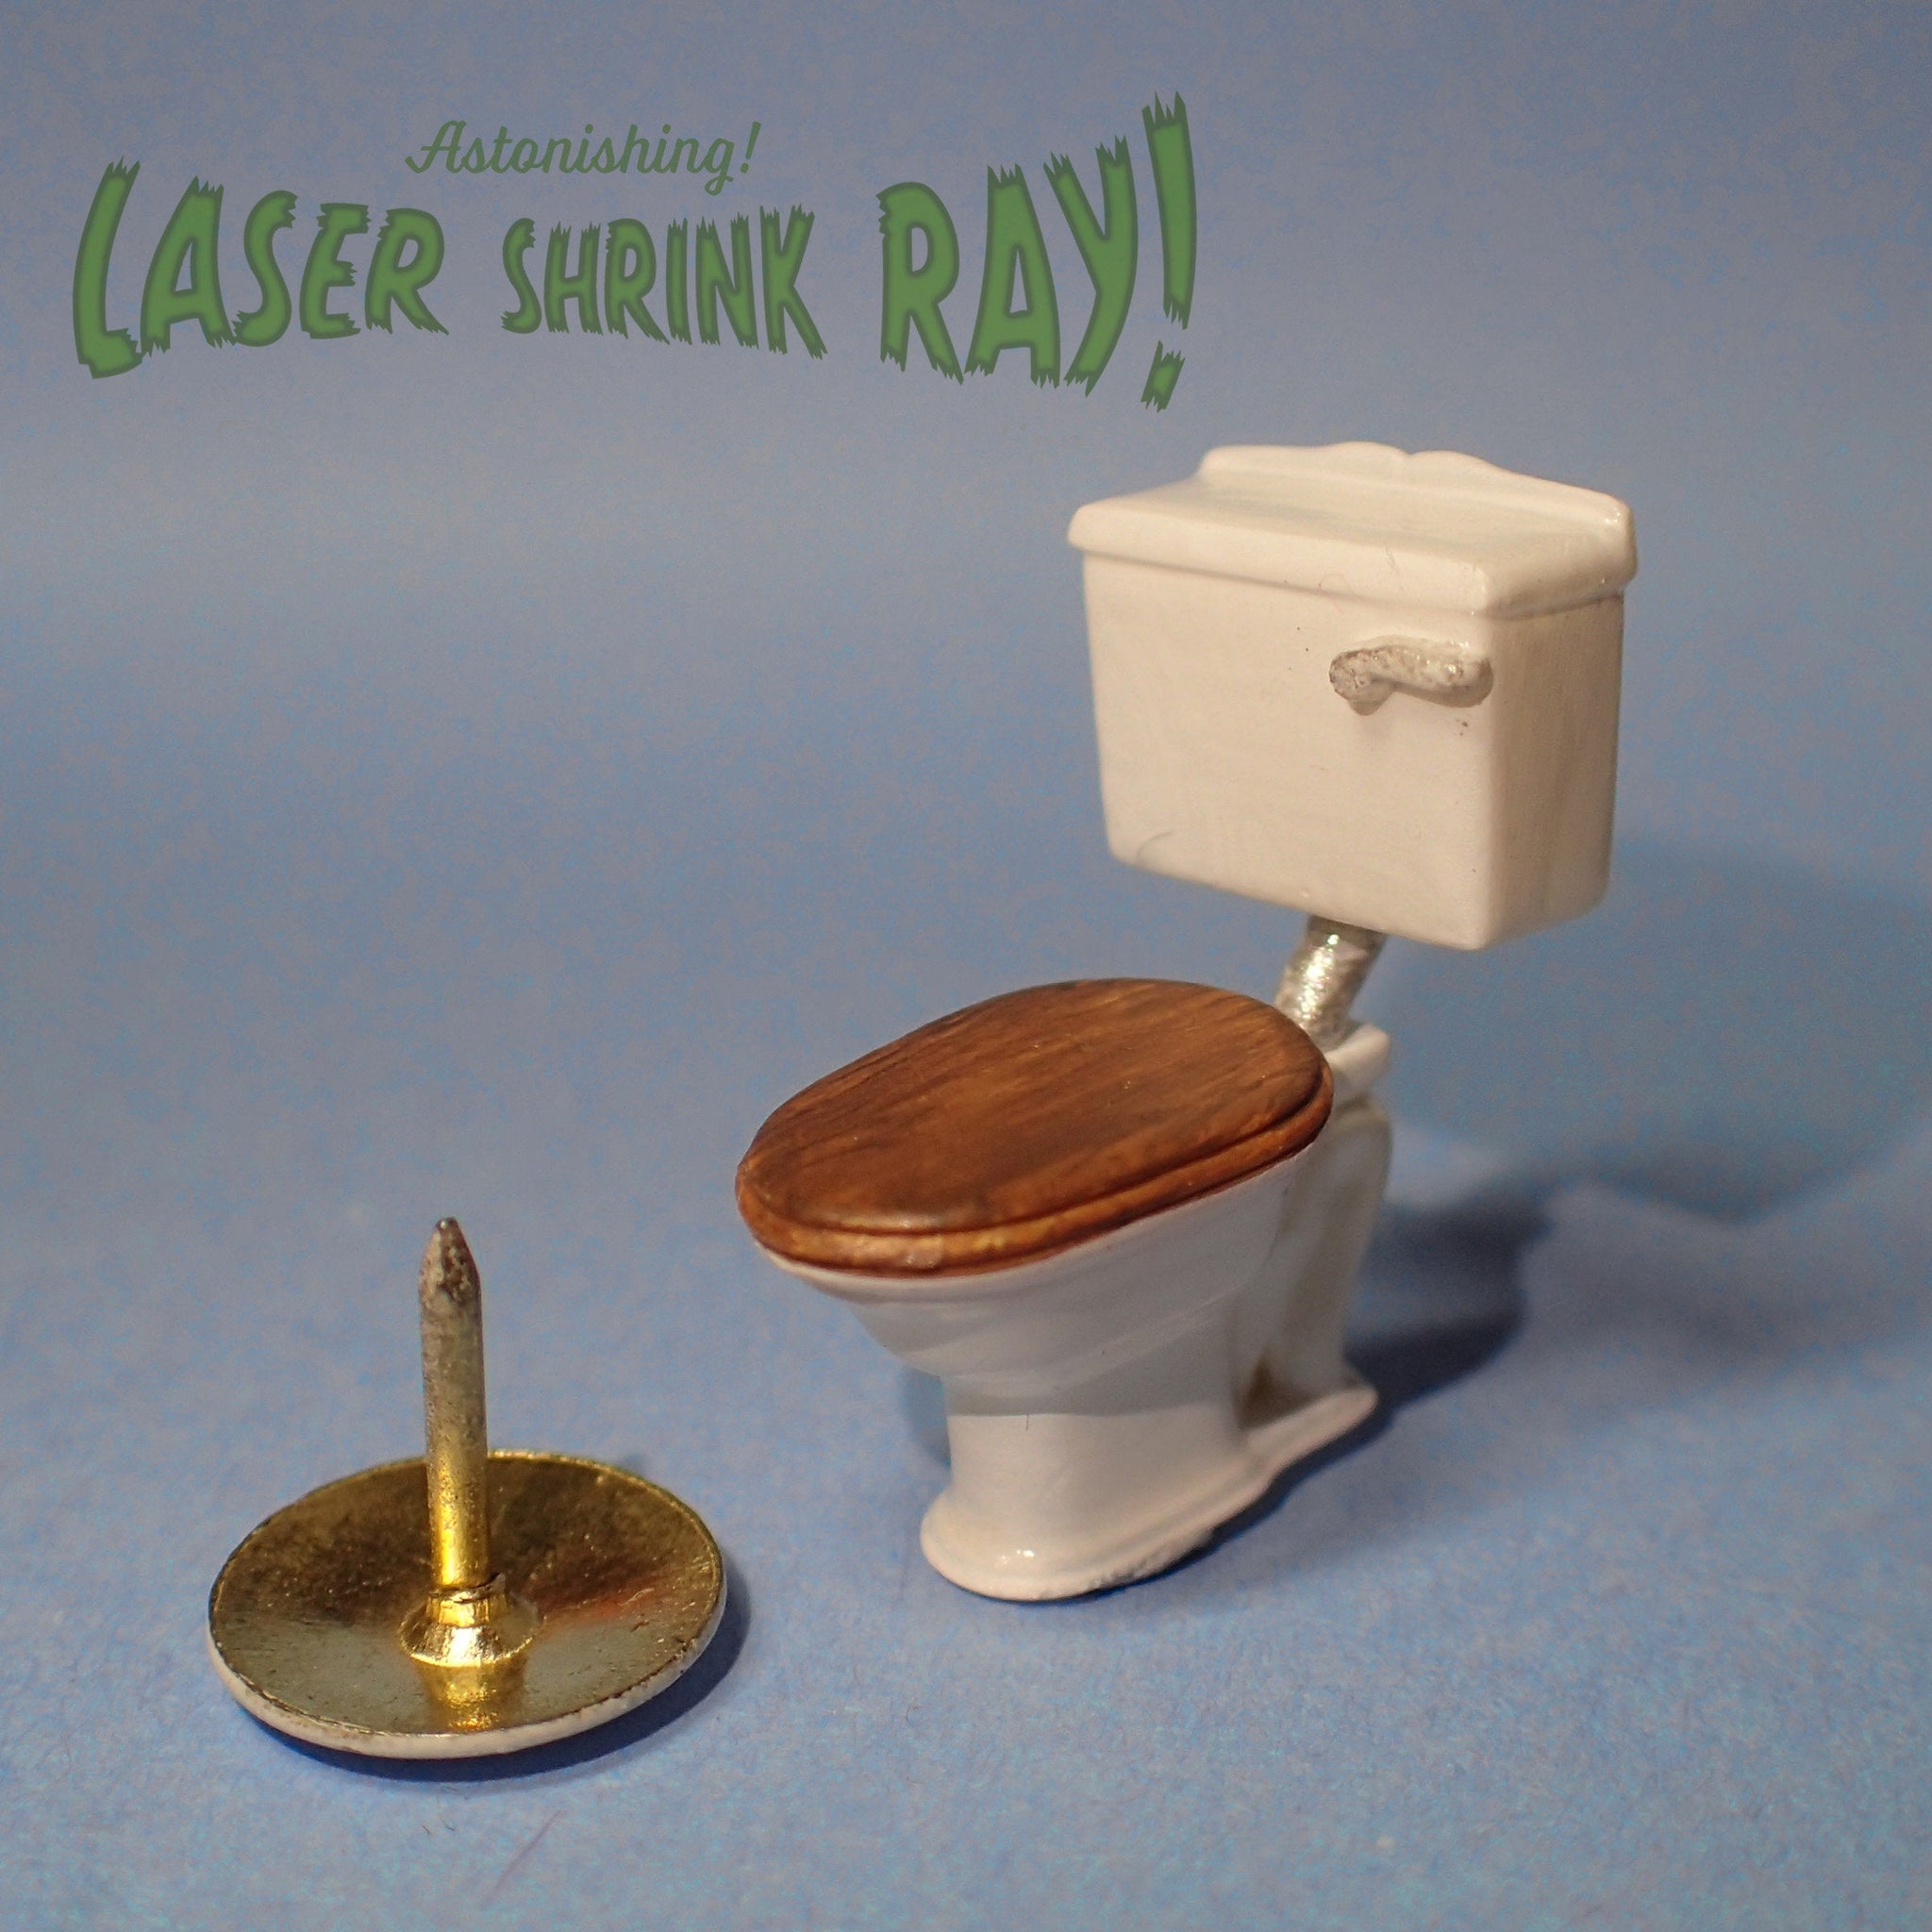 Traditional low cistern toilet, 1/48th scale